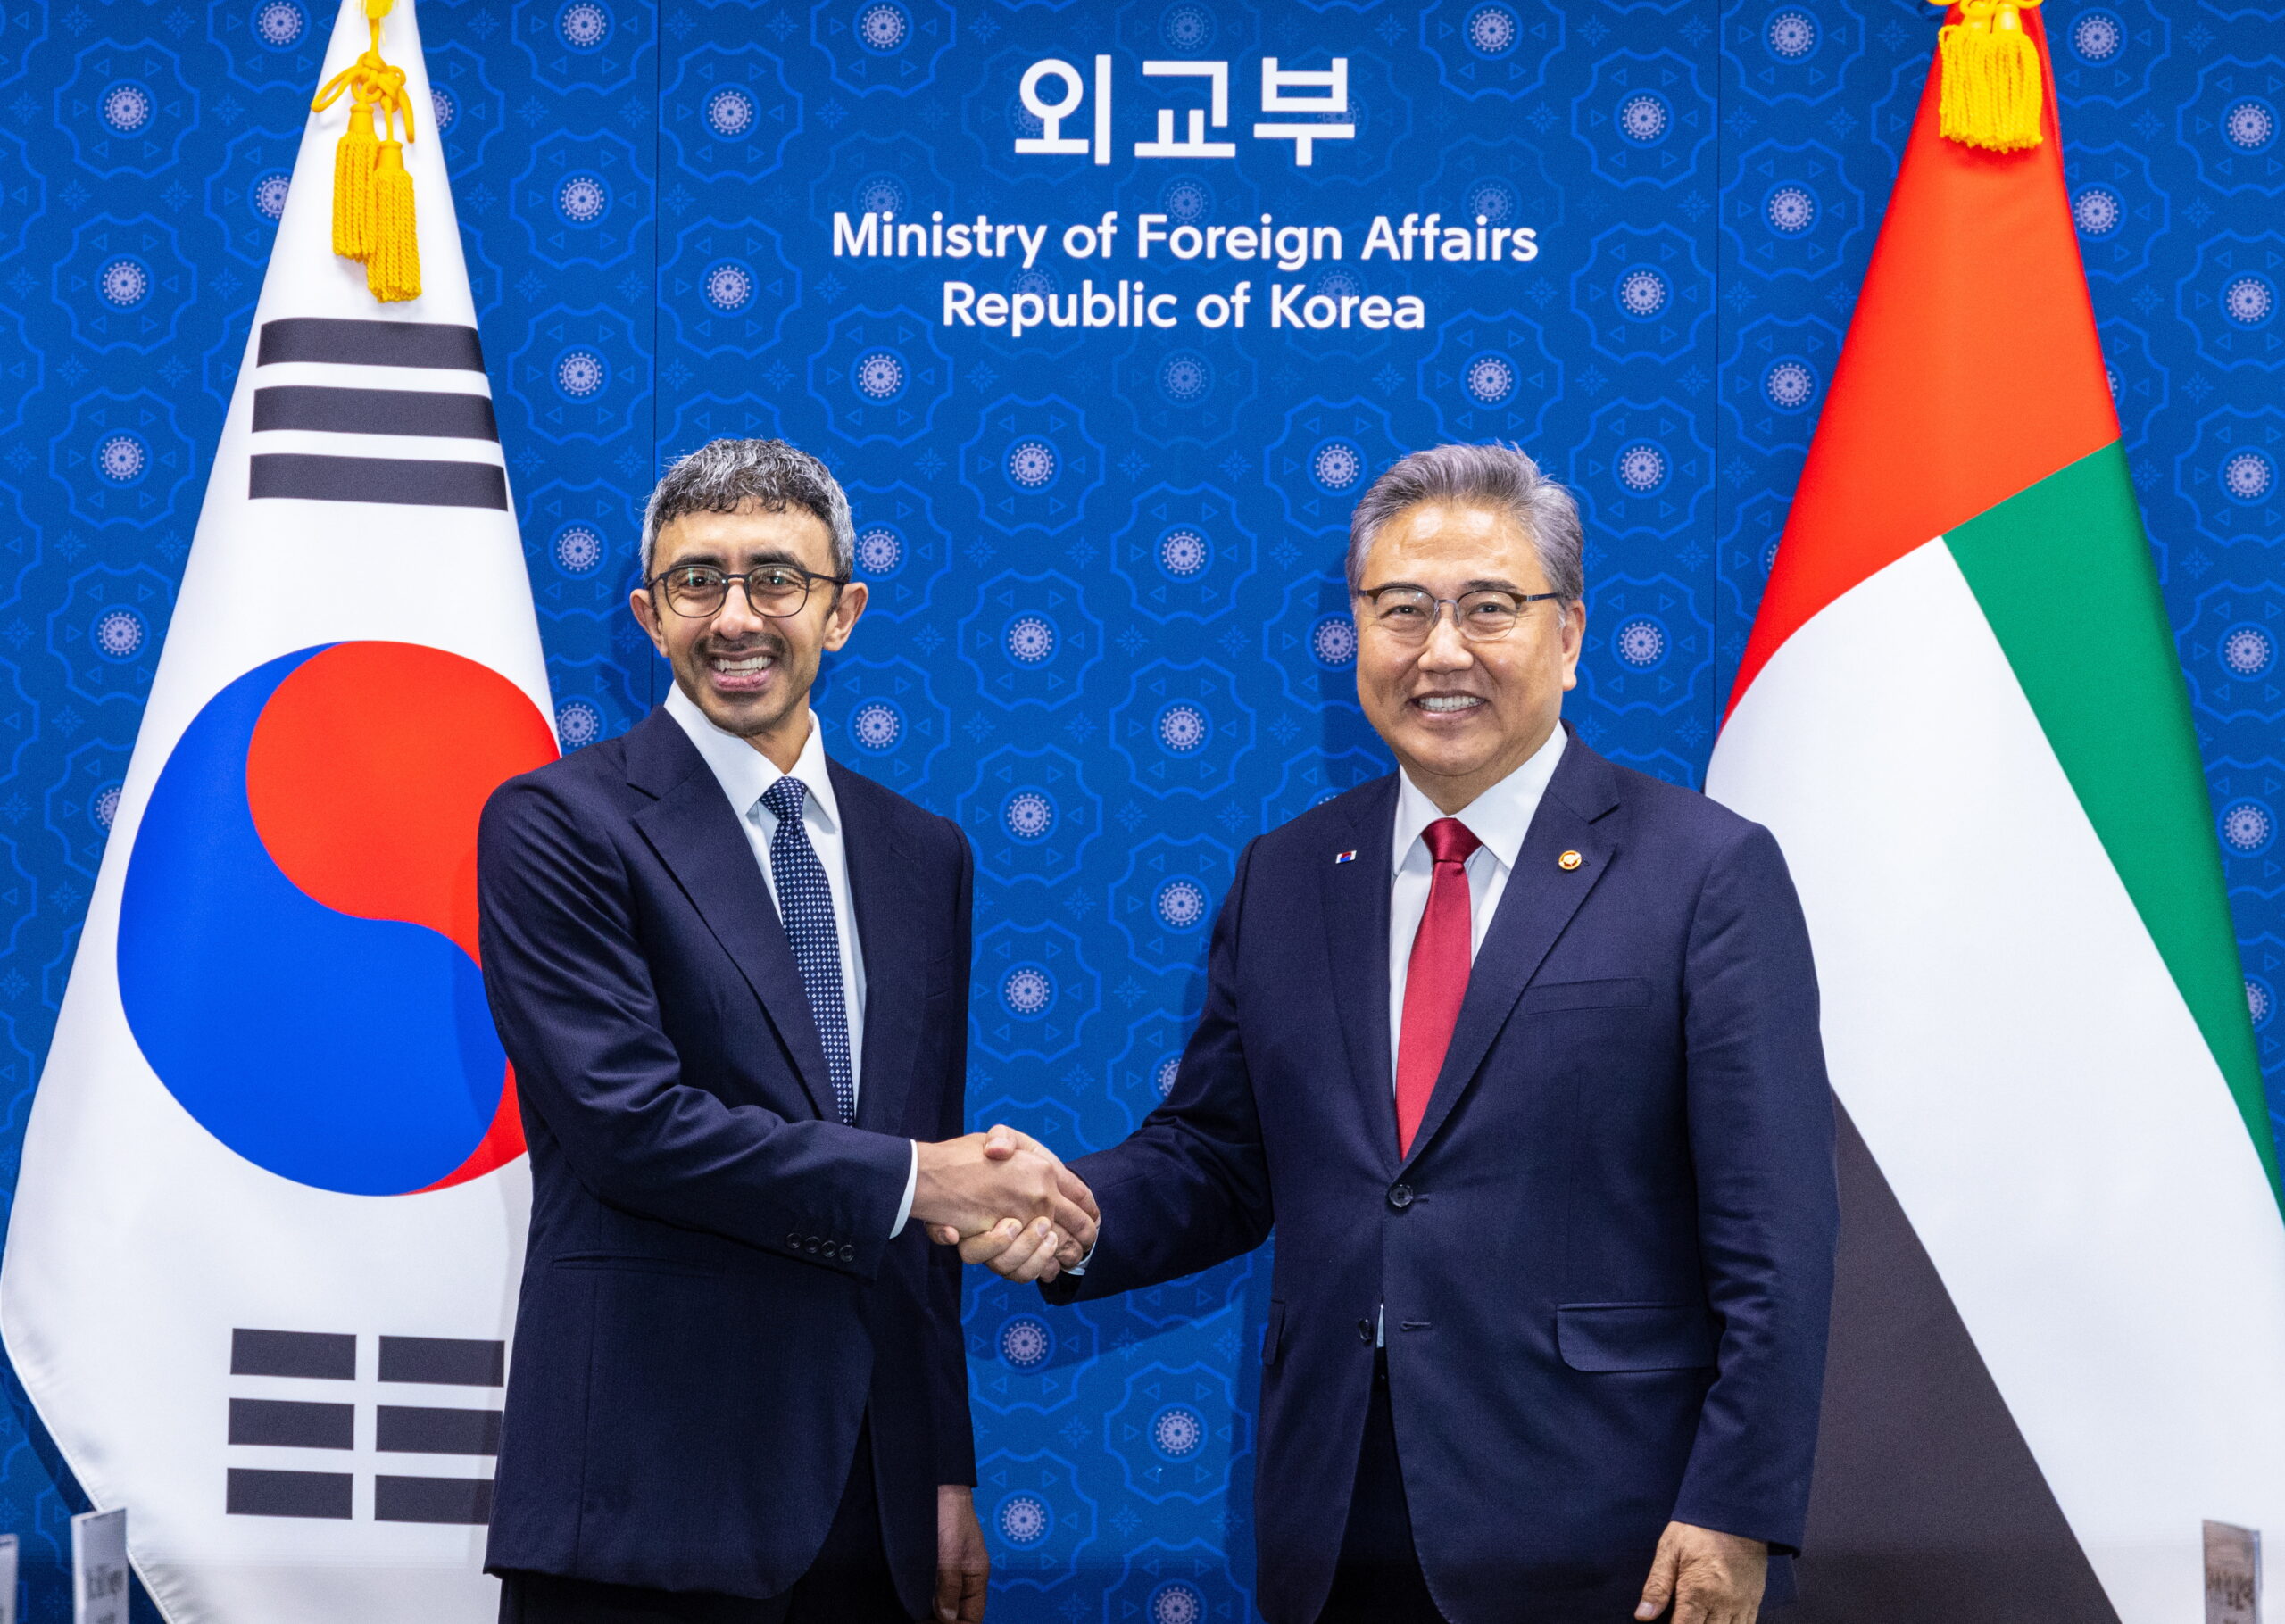 Minister of Foreign Affairs and Park Jin called for people's lives and aid measures to be prioritised.